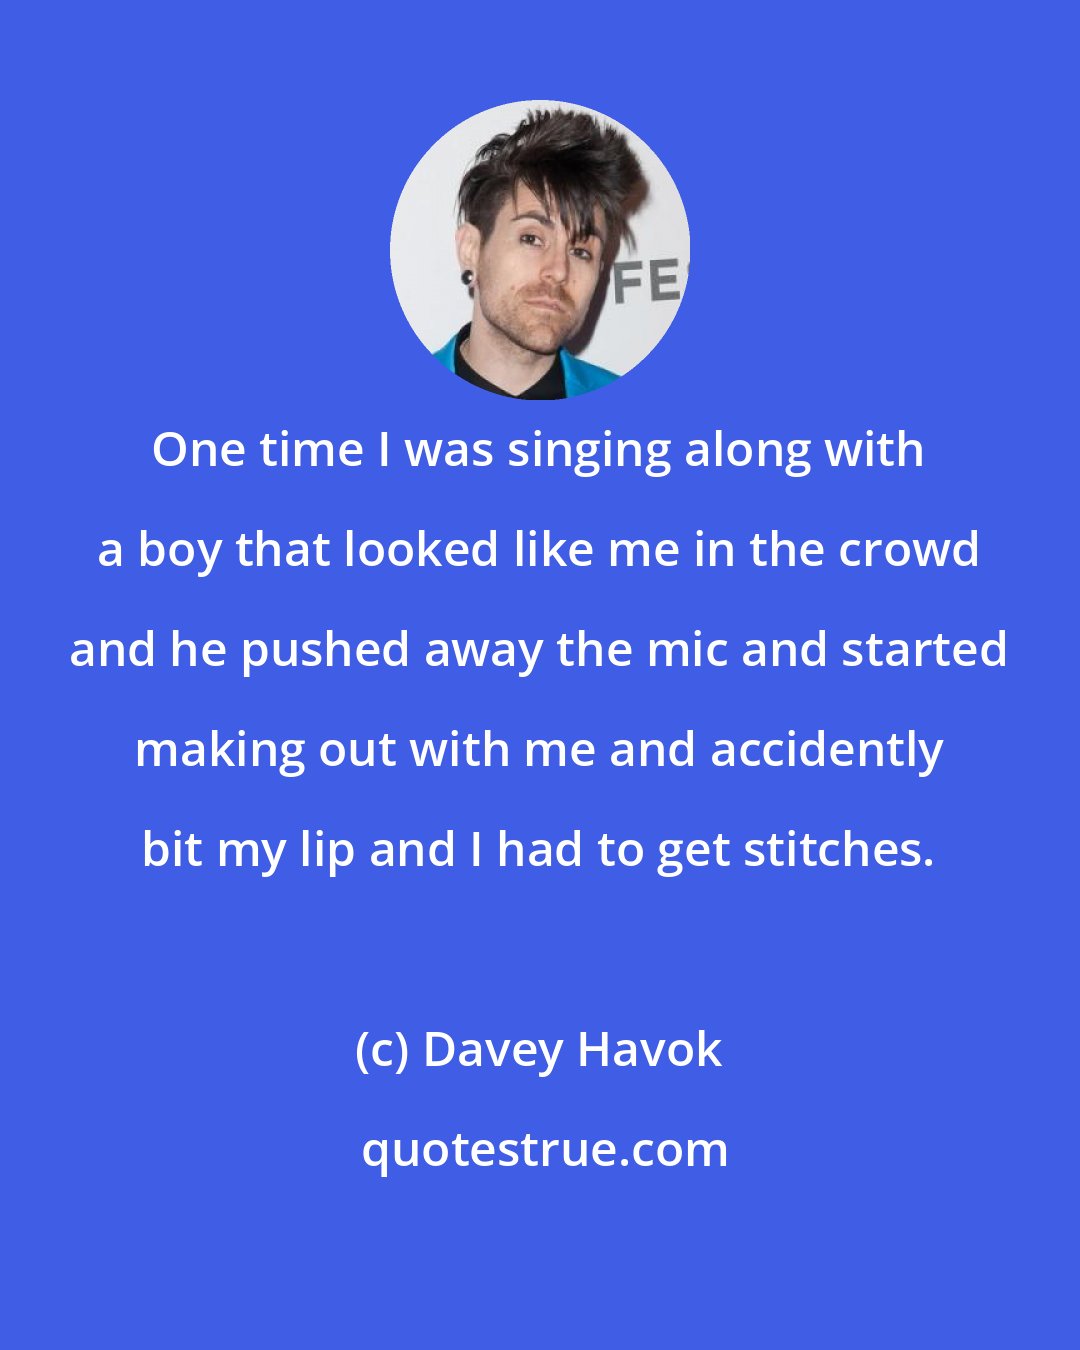 Davey Havok: One time I was singing along with a boy that looked like me in the crowd and he pushed away the mic and started making out with me and accidently bit my lip and I had to get stitches.